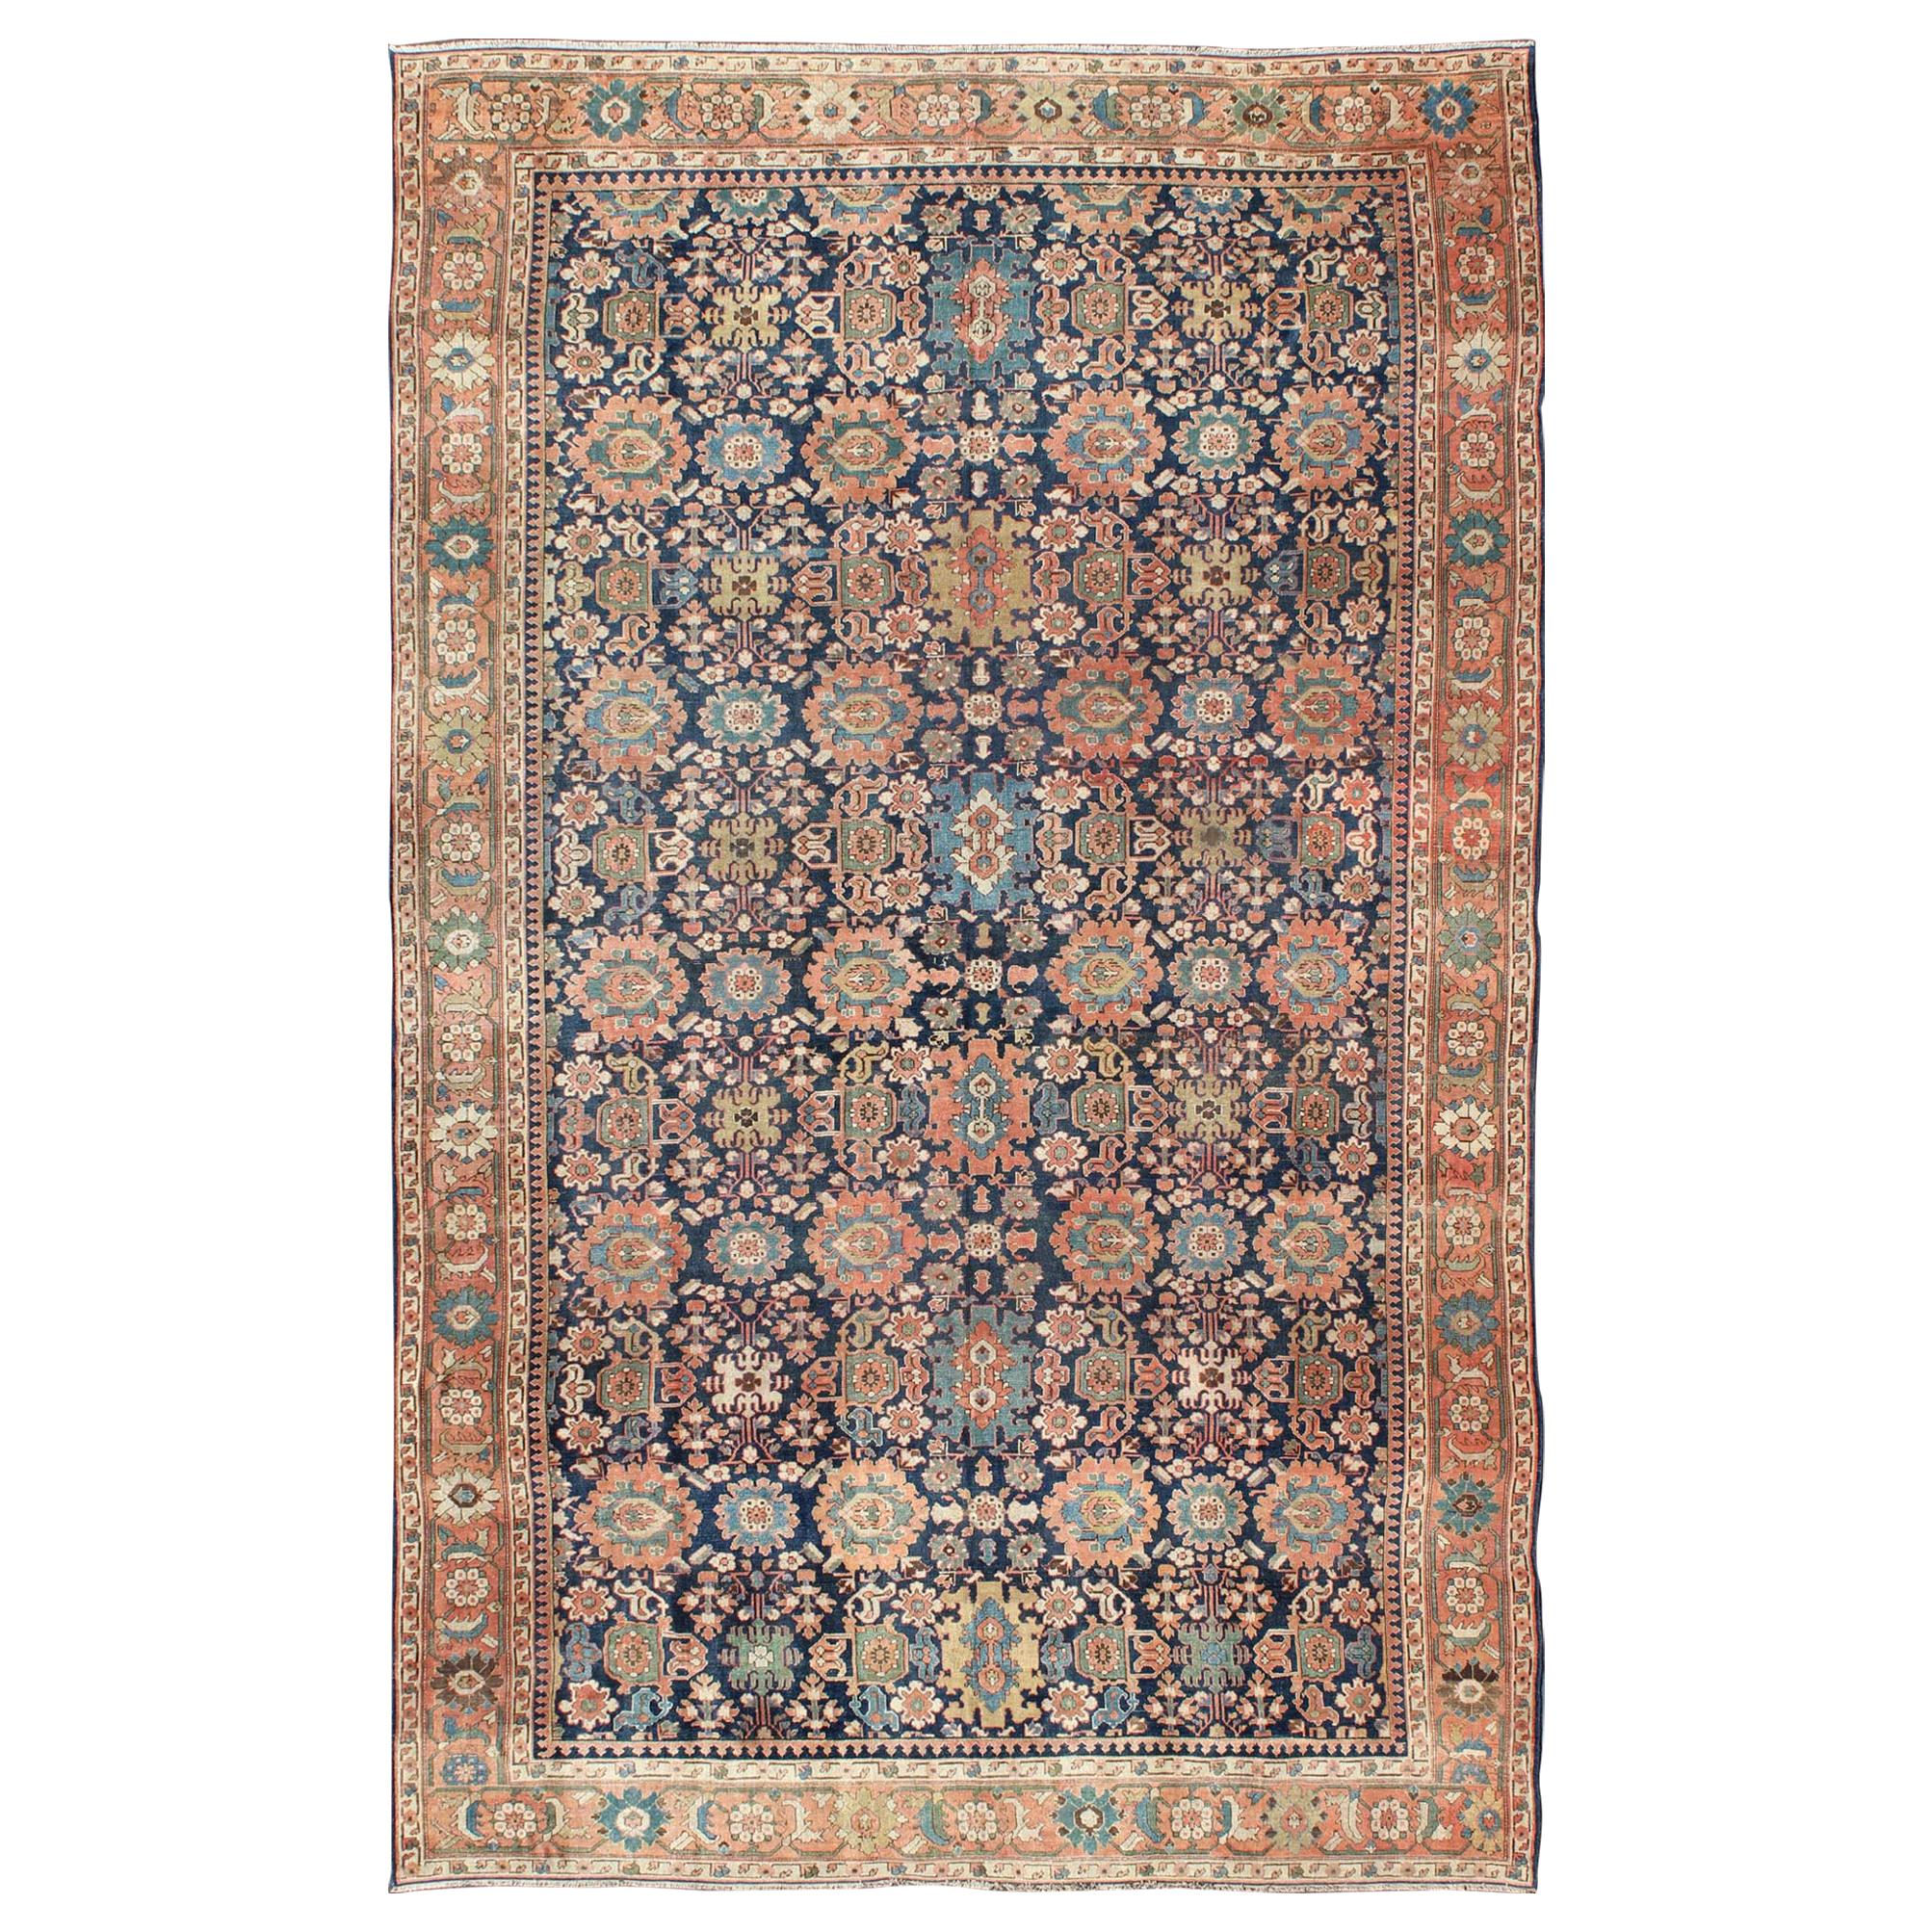 Very Large Antique Persian Hamedan Rug with Blossom Design in Blue Background For Sale